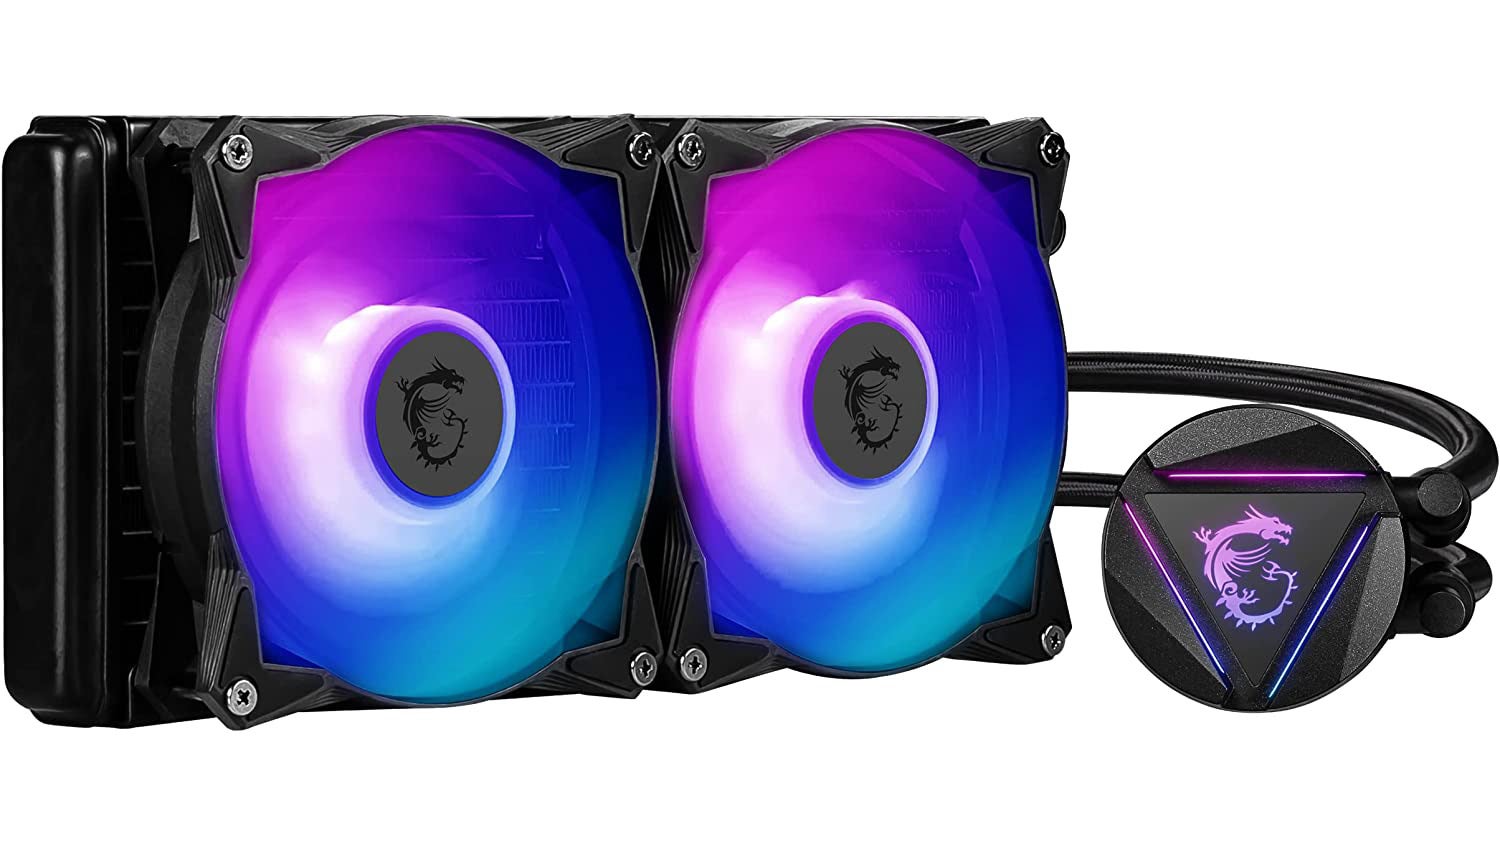 Image for Get a 280mm MSI AIO liquid cooler for £50 (half-price)